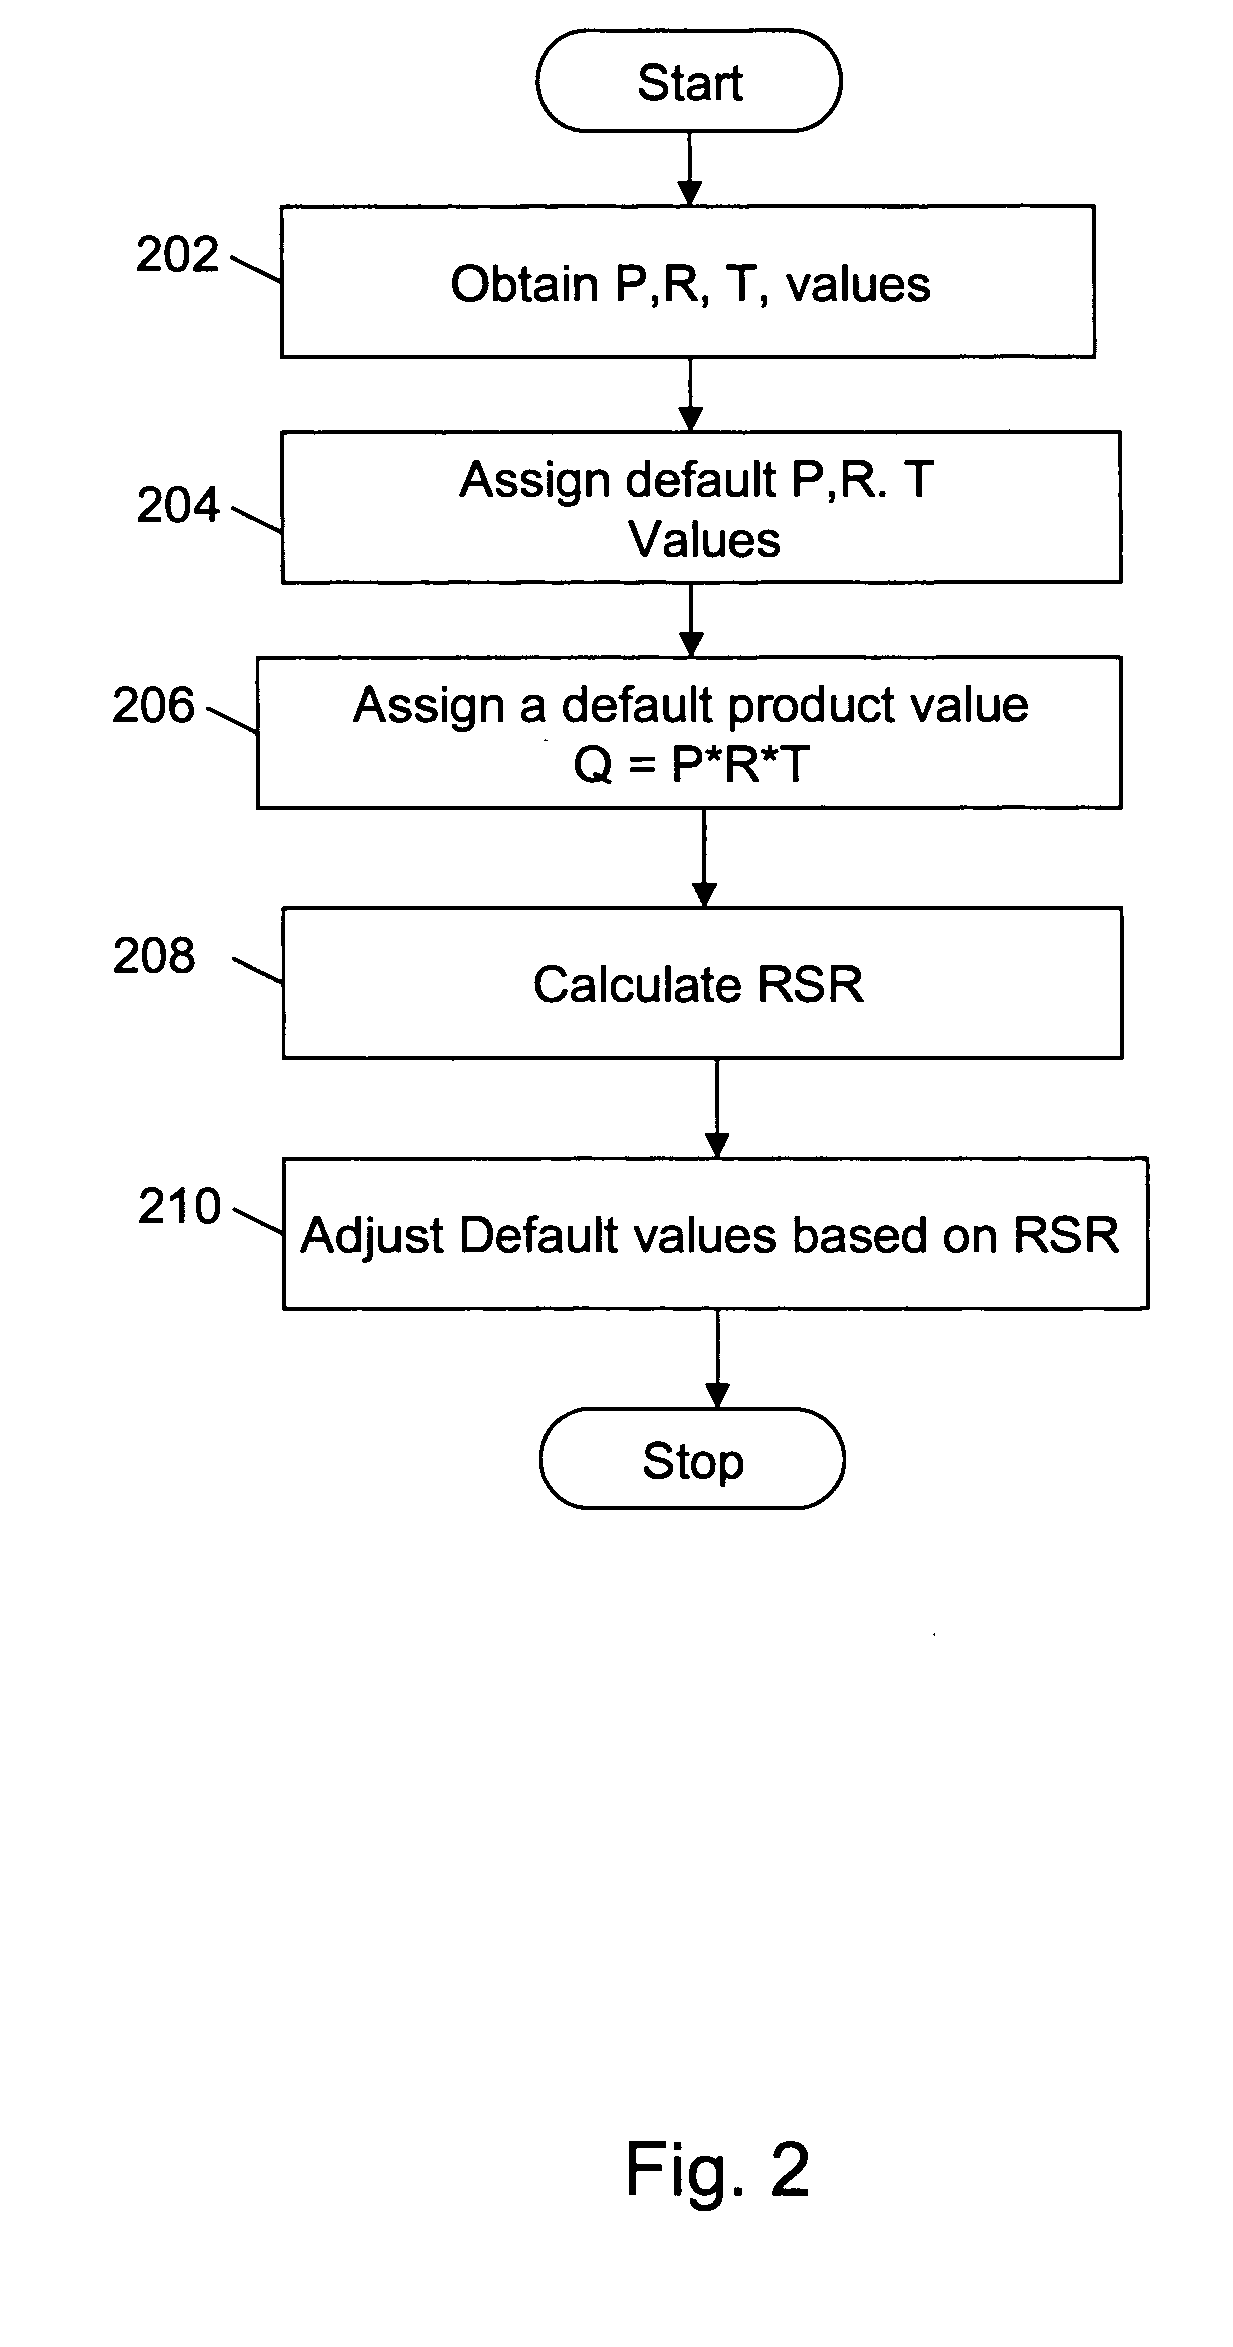 Method and system for coordinating radio resources in unlicensed frequency bands